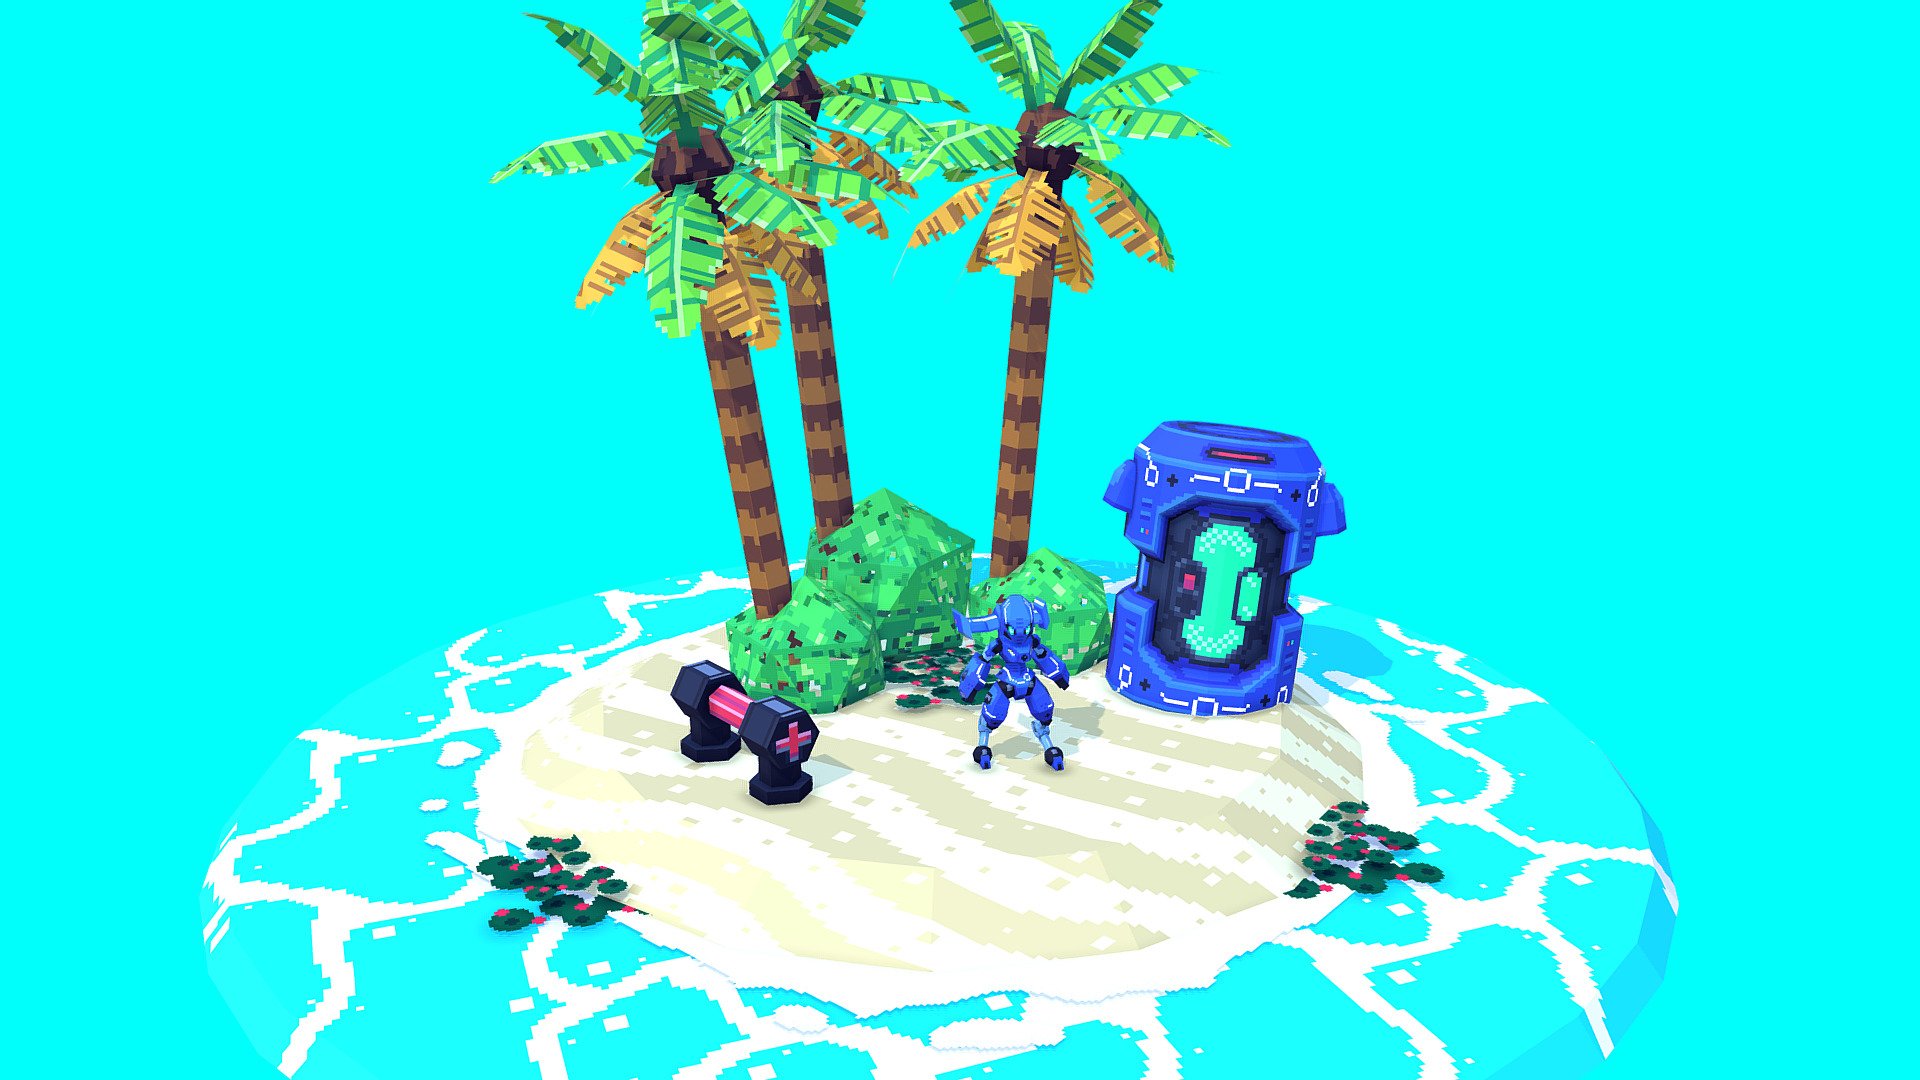 Beach assets from Technic Ranger, my university capstone project. Style inspired by Nintendo 64 era graphics.

play here: https://garnarbles.itch.io/technic-ranger - Technic Ranger: Beach - 3D model by Willie Garnarbles (@GARNARBLES) 3d model